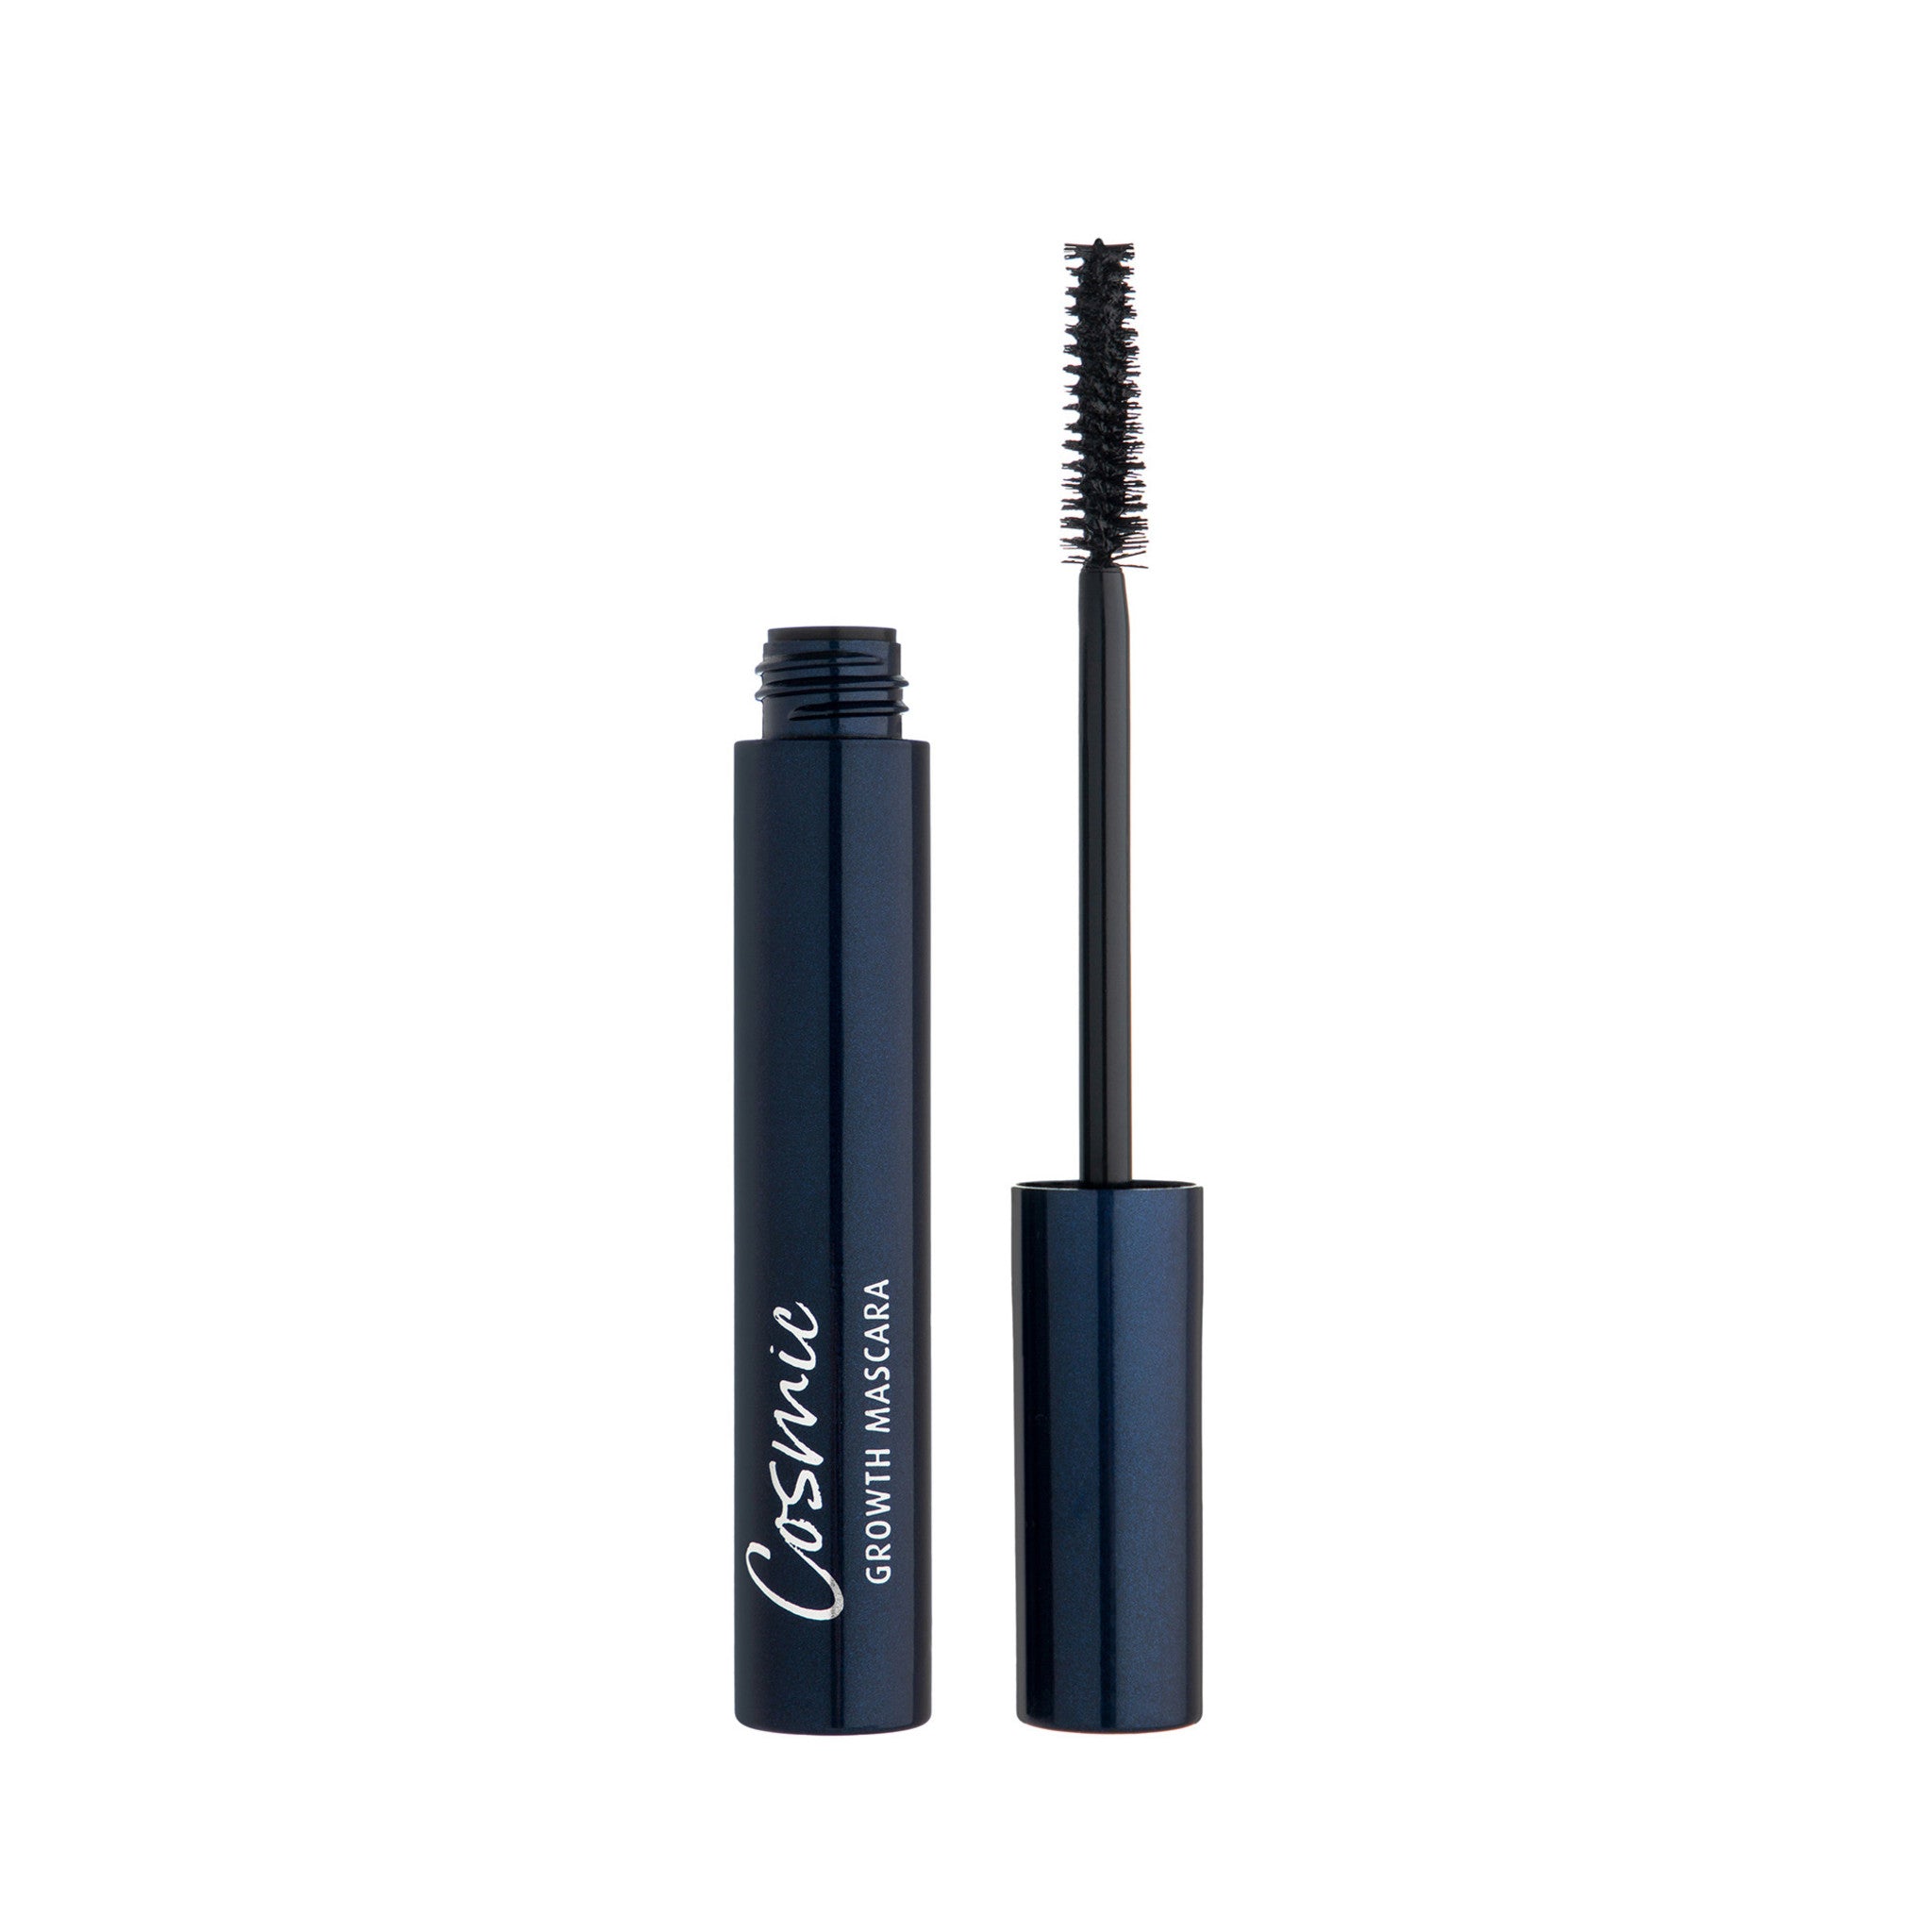 Lune+Aster Cosmic Growth Mascara main image. This product is in the color black